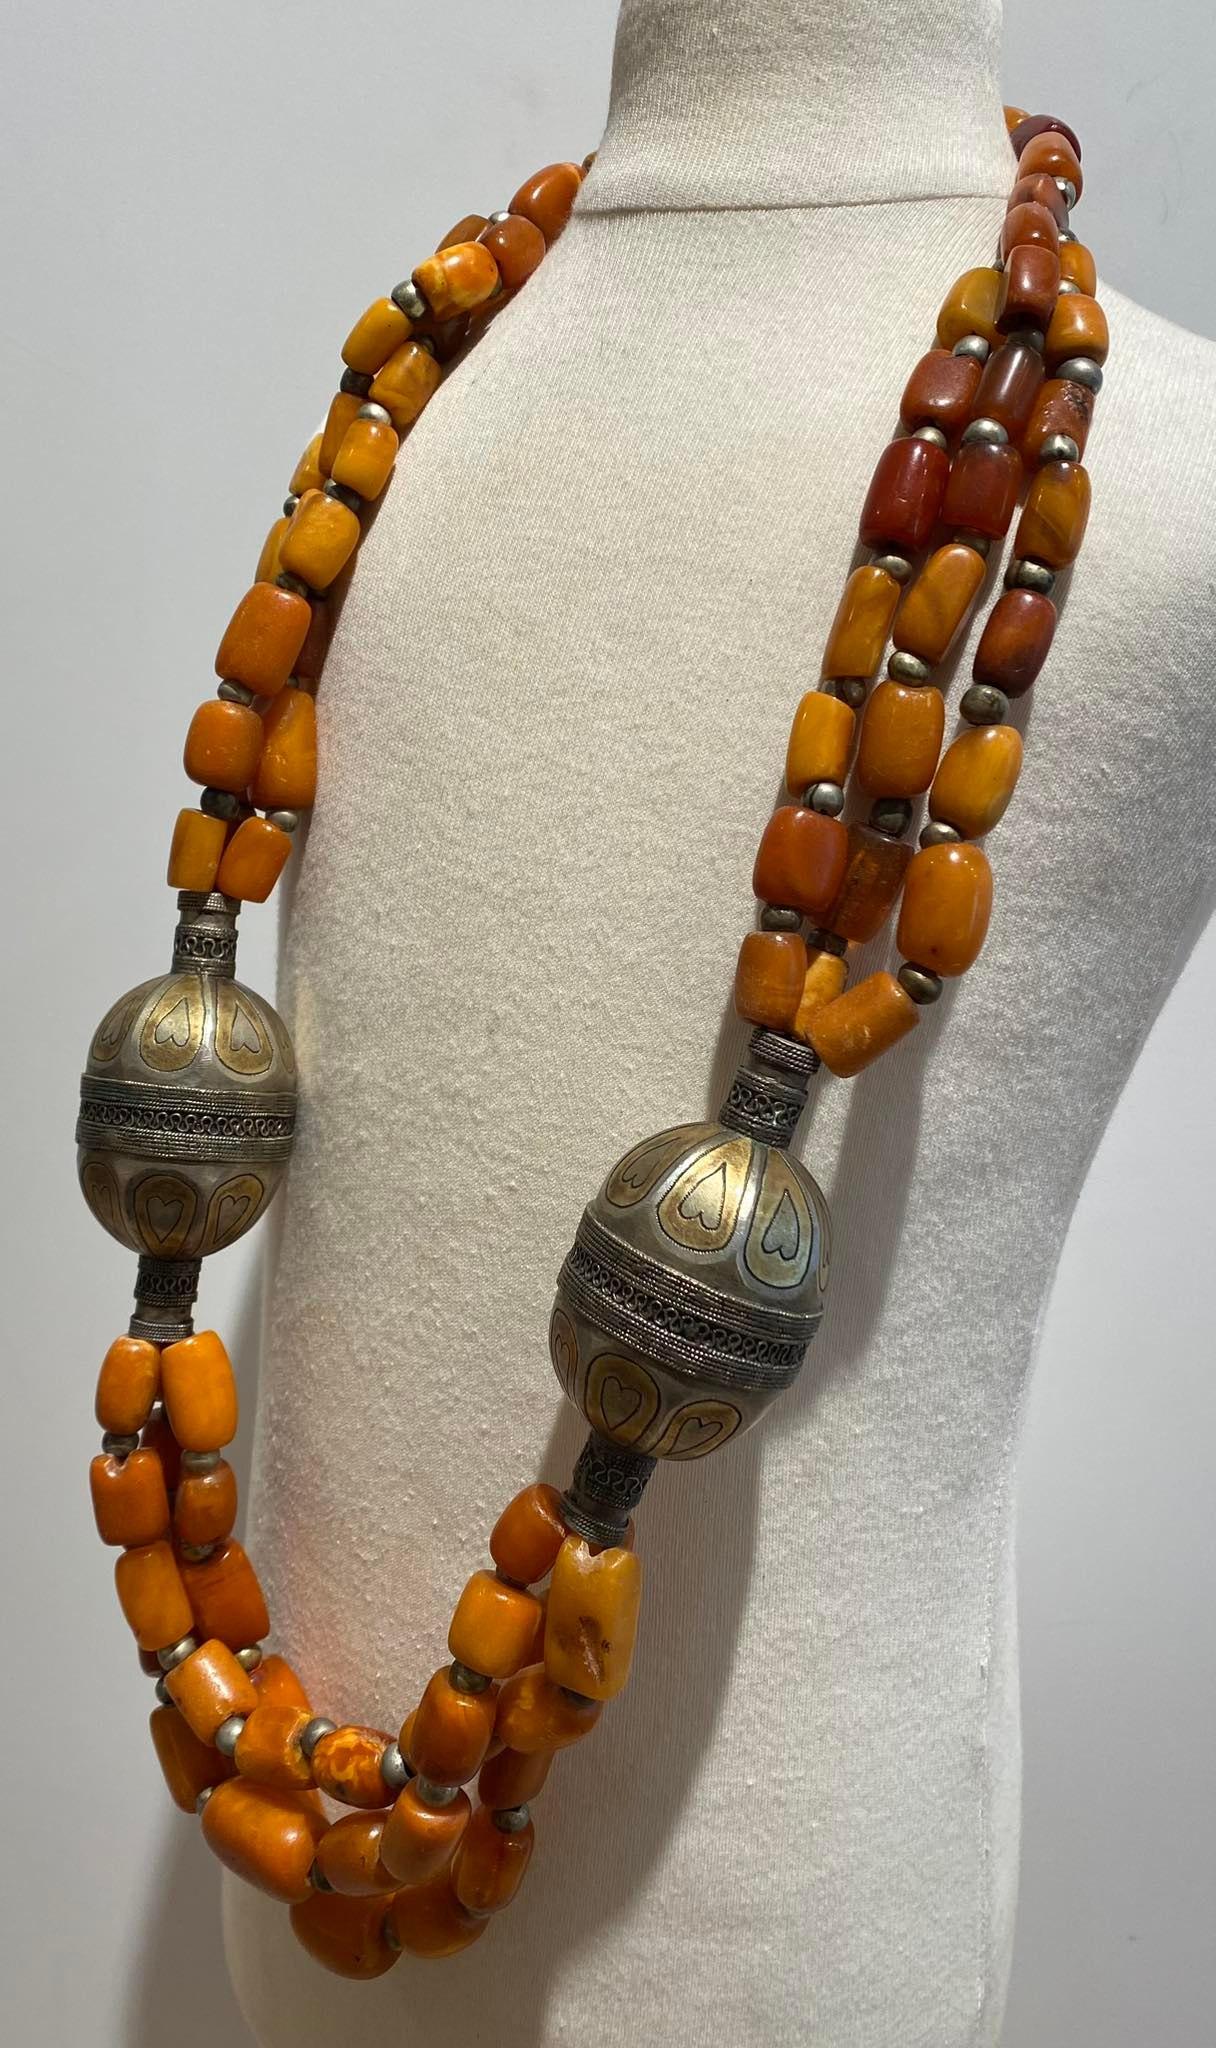  Antique Amber Necklace Yemen Afghanistan 18/19th Century Islamic Art silver  For Sale 4